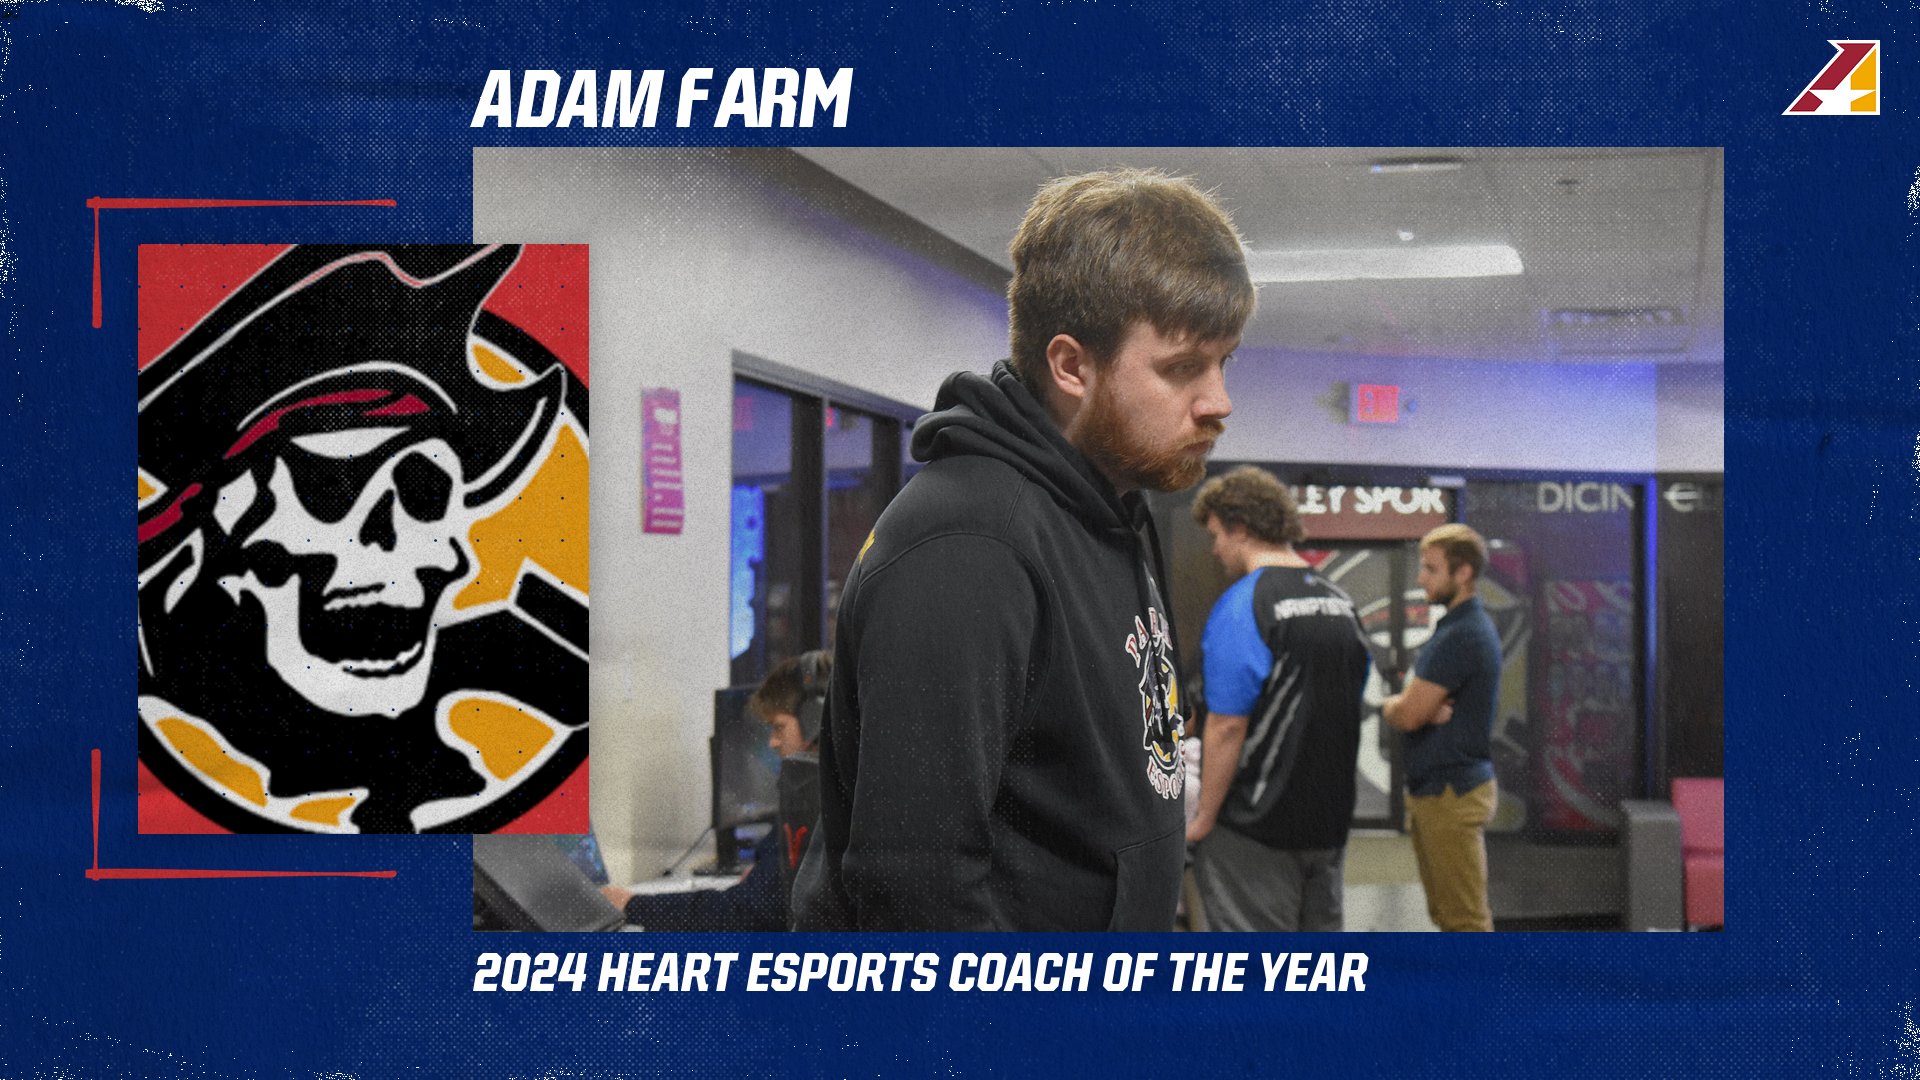 Park University's Adam Farm Selected First-Ever Heart Esports Coach of the Year